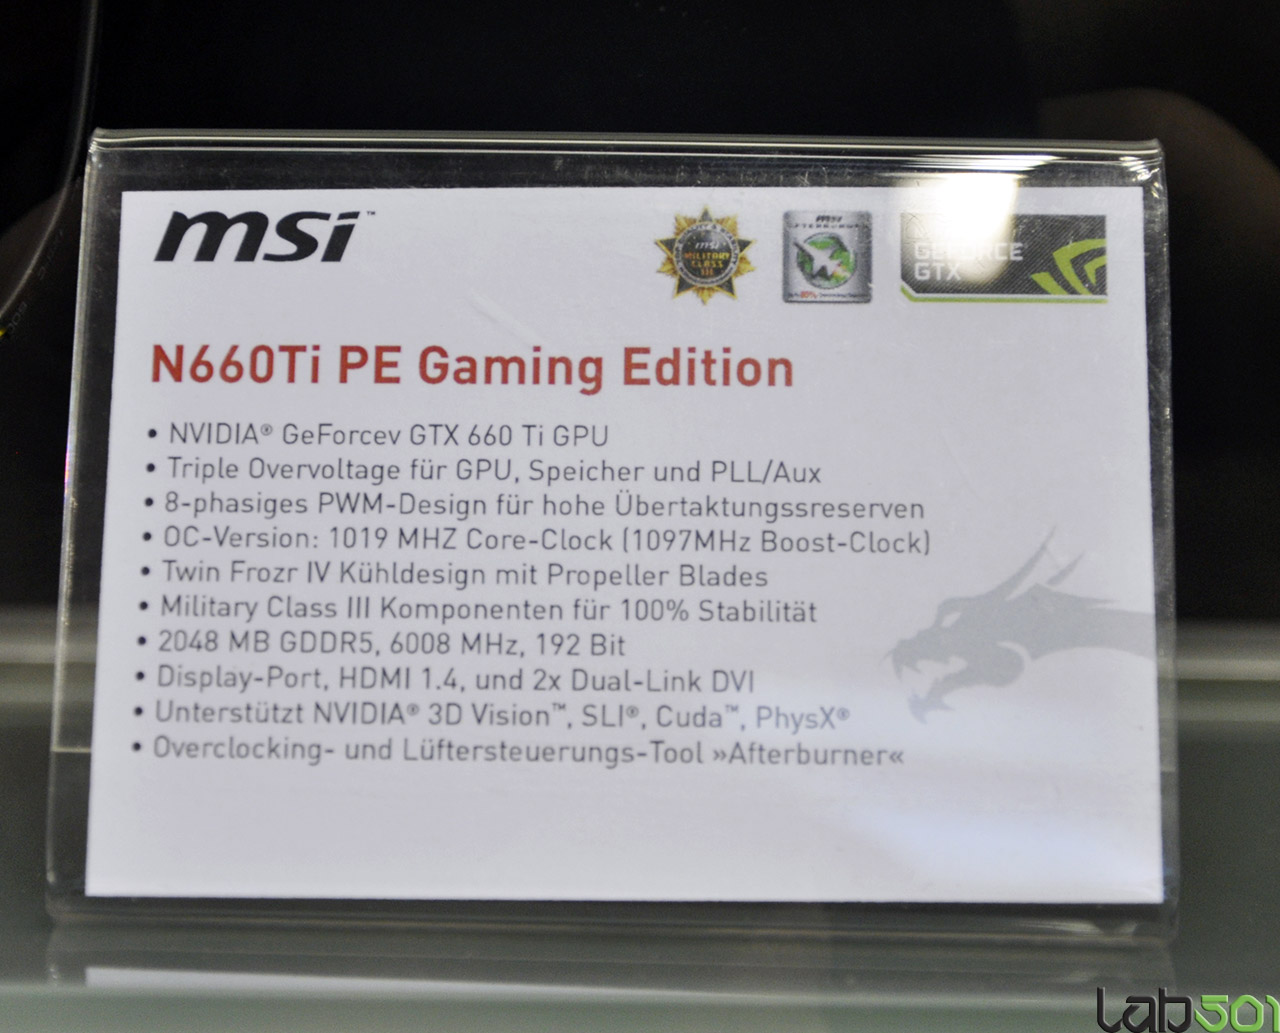 Media asset in full size related to 3dfxzone.it news item entitled as follows: MSI mostra un prototipo della video card N660Ti PE Gaming Edition | Image Name: news19085_MSI-N660Ti-PE-Gaming-Edition_2.jpg